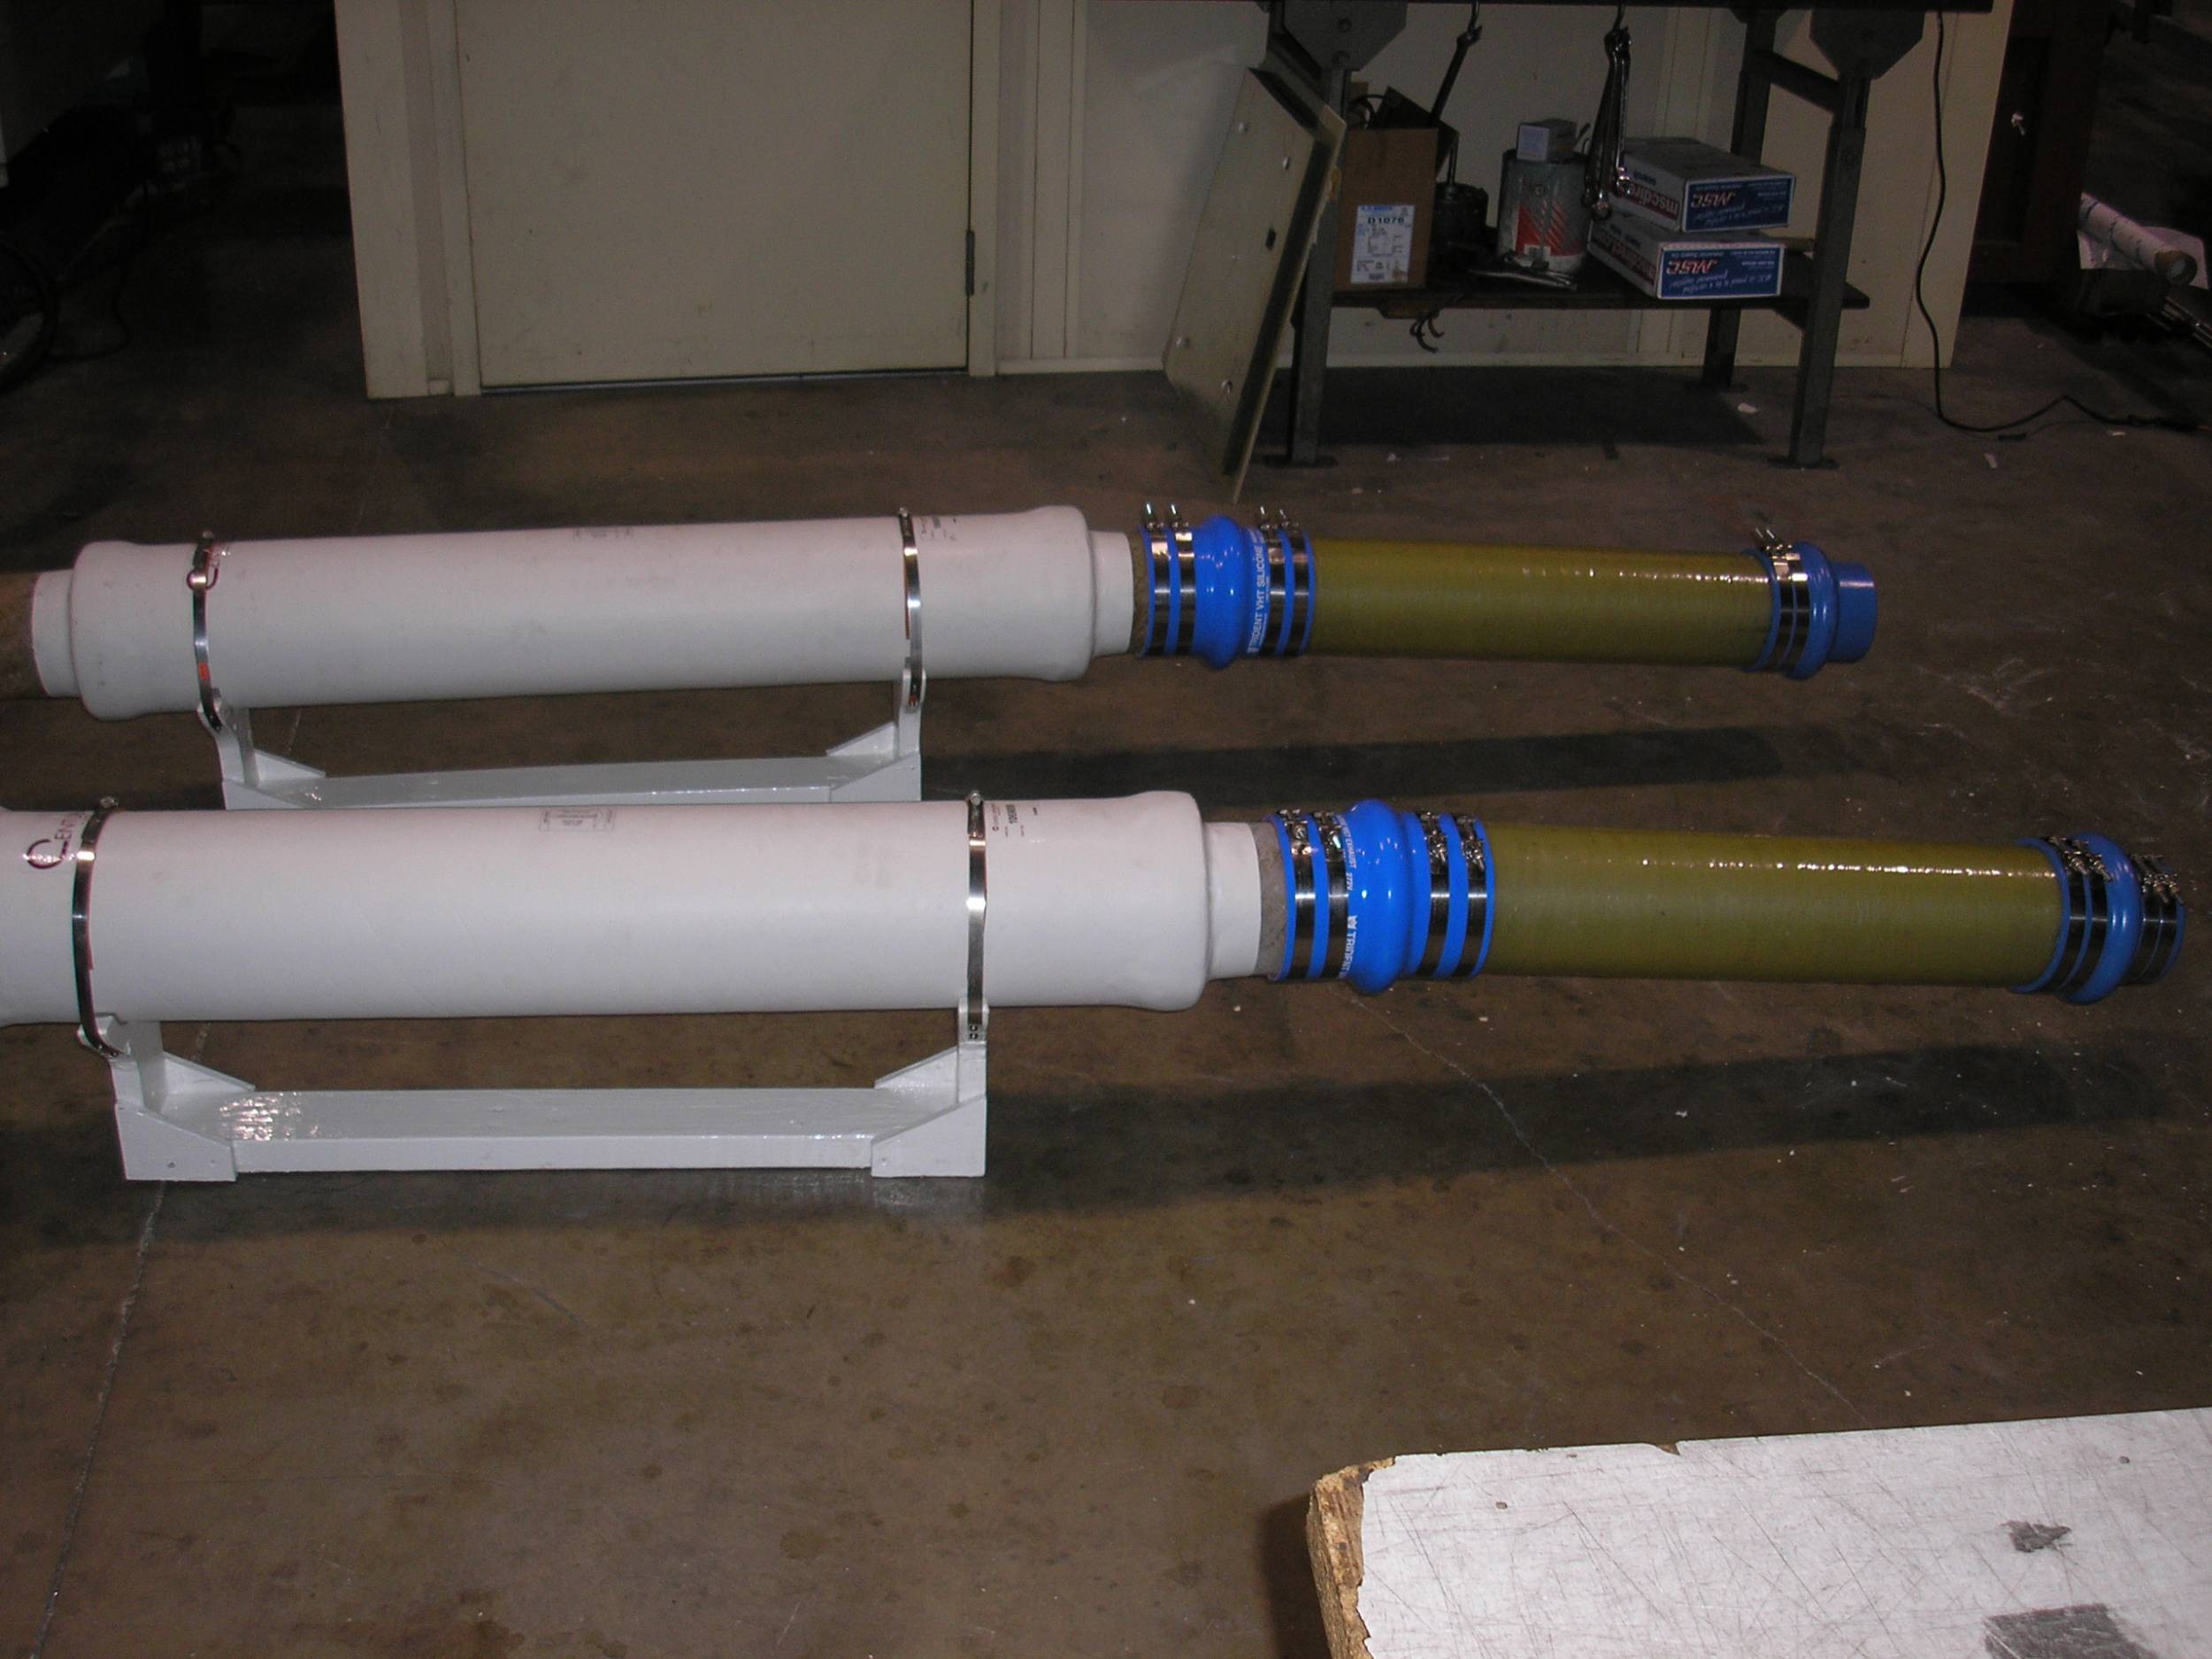 New silencers